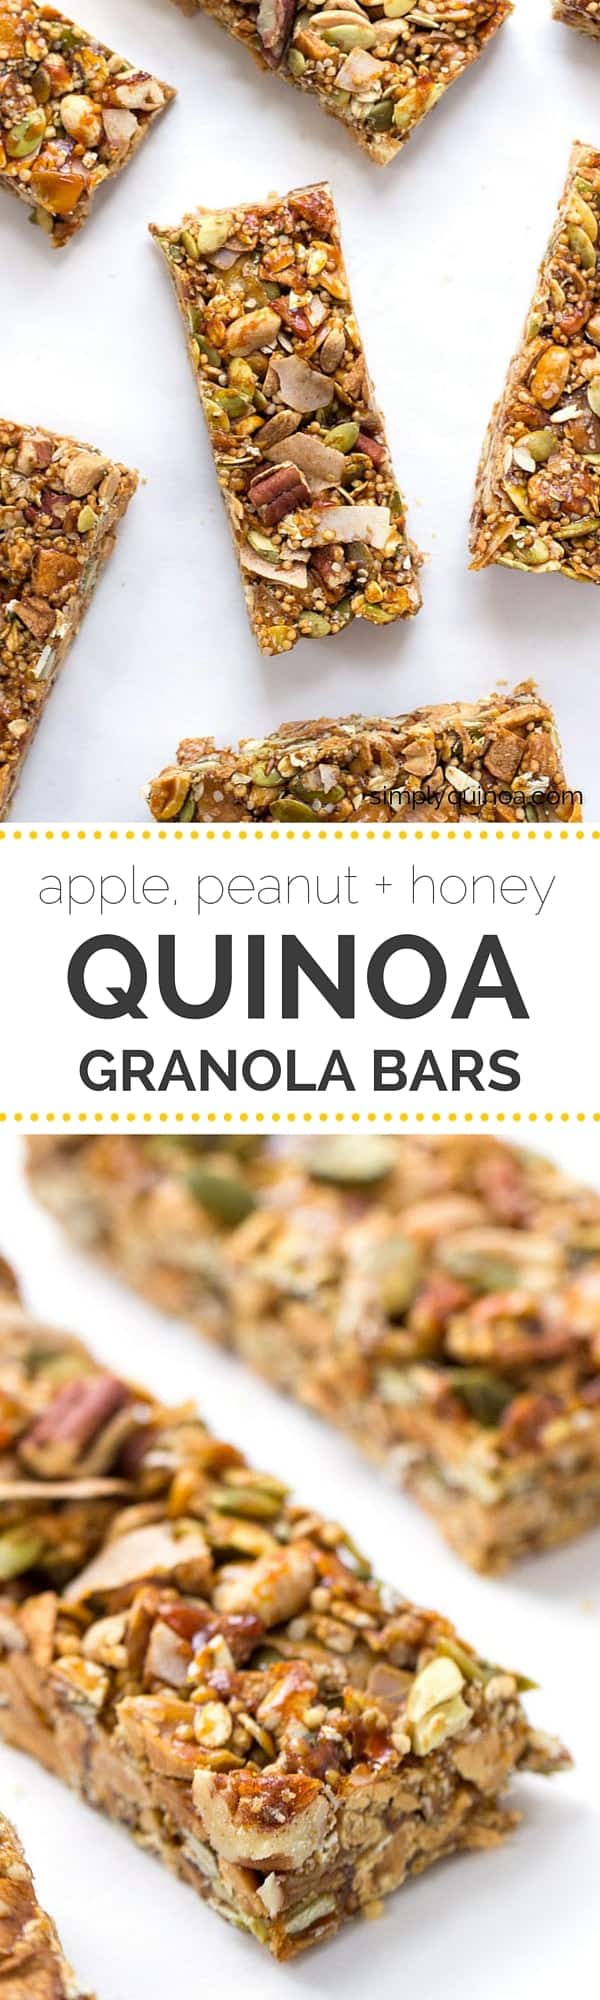 Apple, Peanut + Honey Quinoa Granola Bars -- they're NO-BAKE, healthy and will actually keep you full when you need a snack!